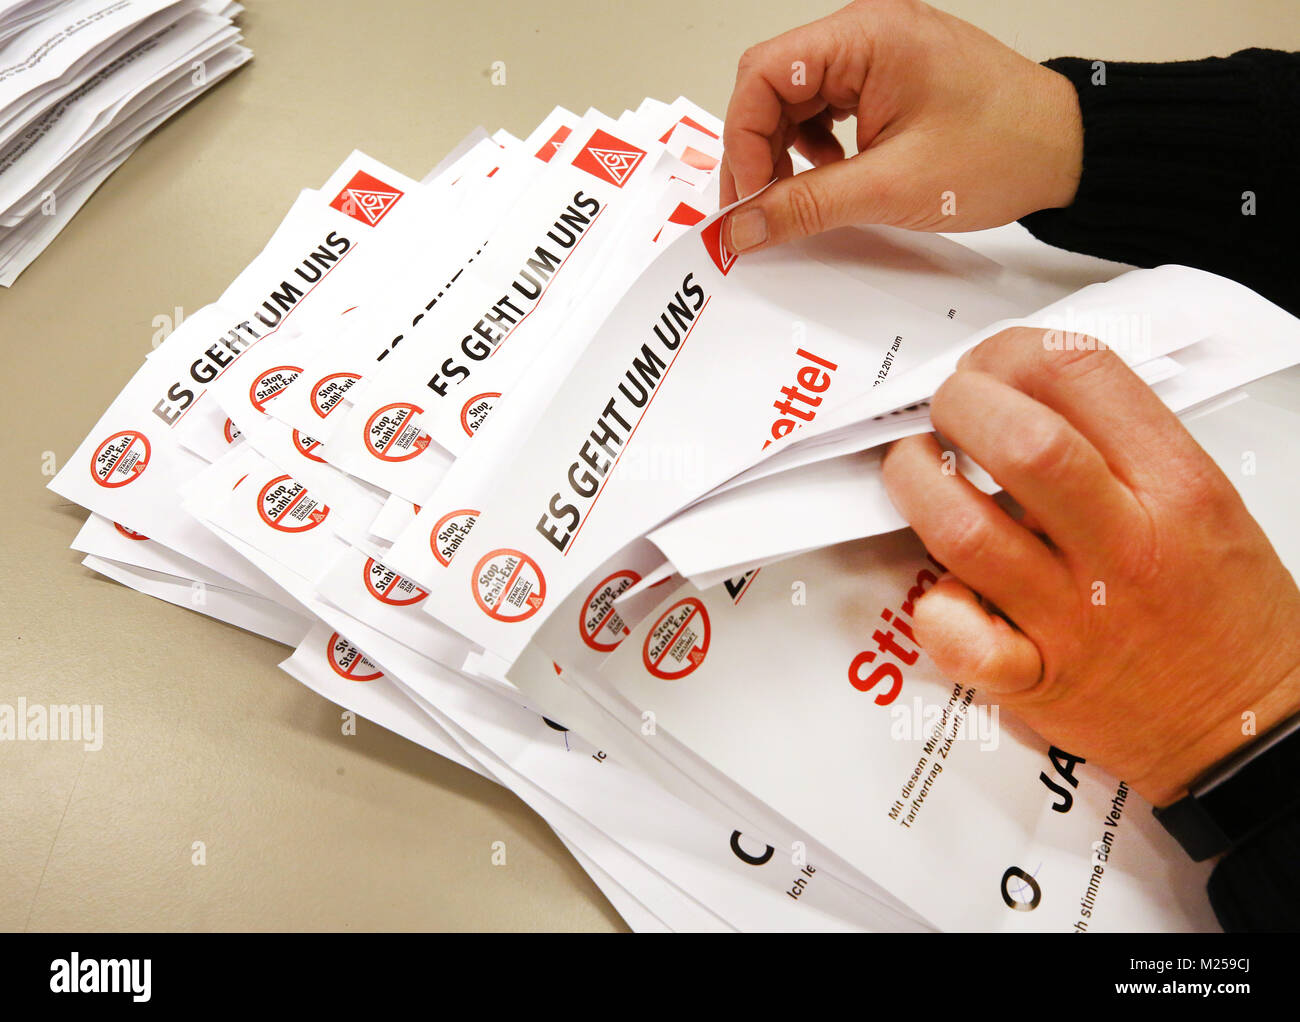 Essen, Germany. 05th Feb, 2018. Members of the Betriebsrat (works council) at ThyssenKrupp counting the ballot papers for the outcome of negotiations on the Tarifvertrag (labout agreement) on the merger with Tata, in Essen, Germany, 05 February 2018. Credit: Roland Weihrauch/dpa/Alamy Live News Stock Photo